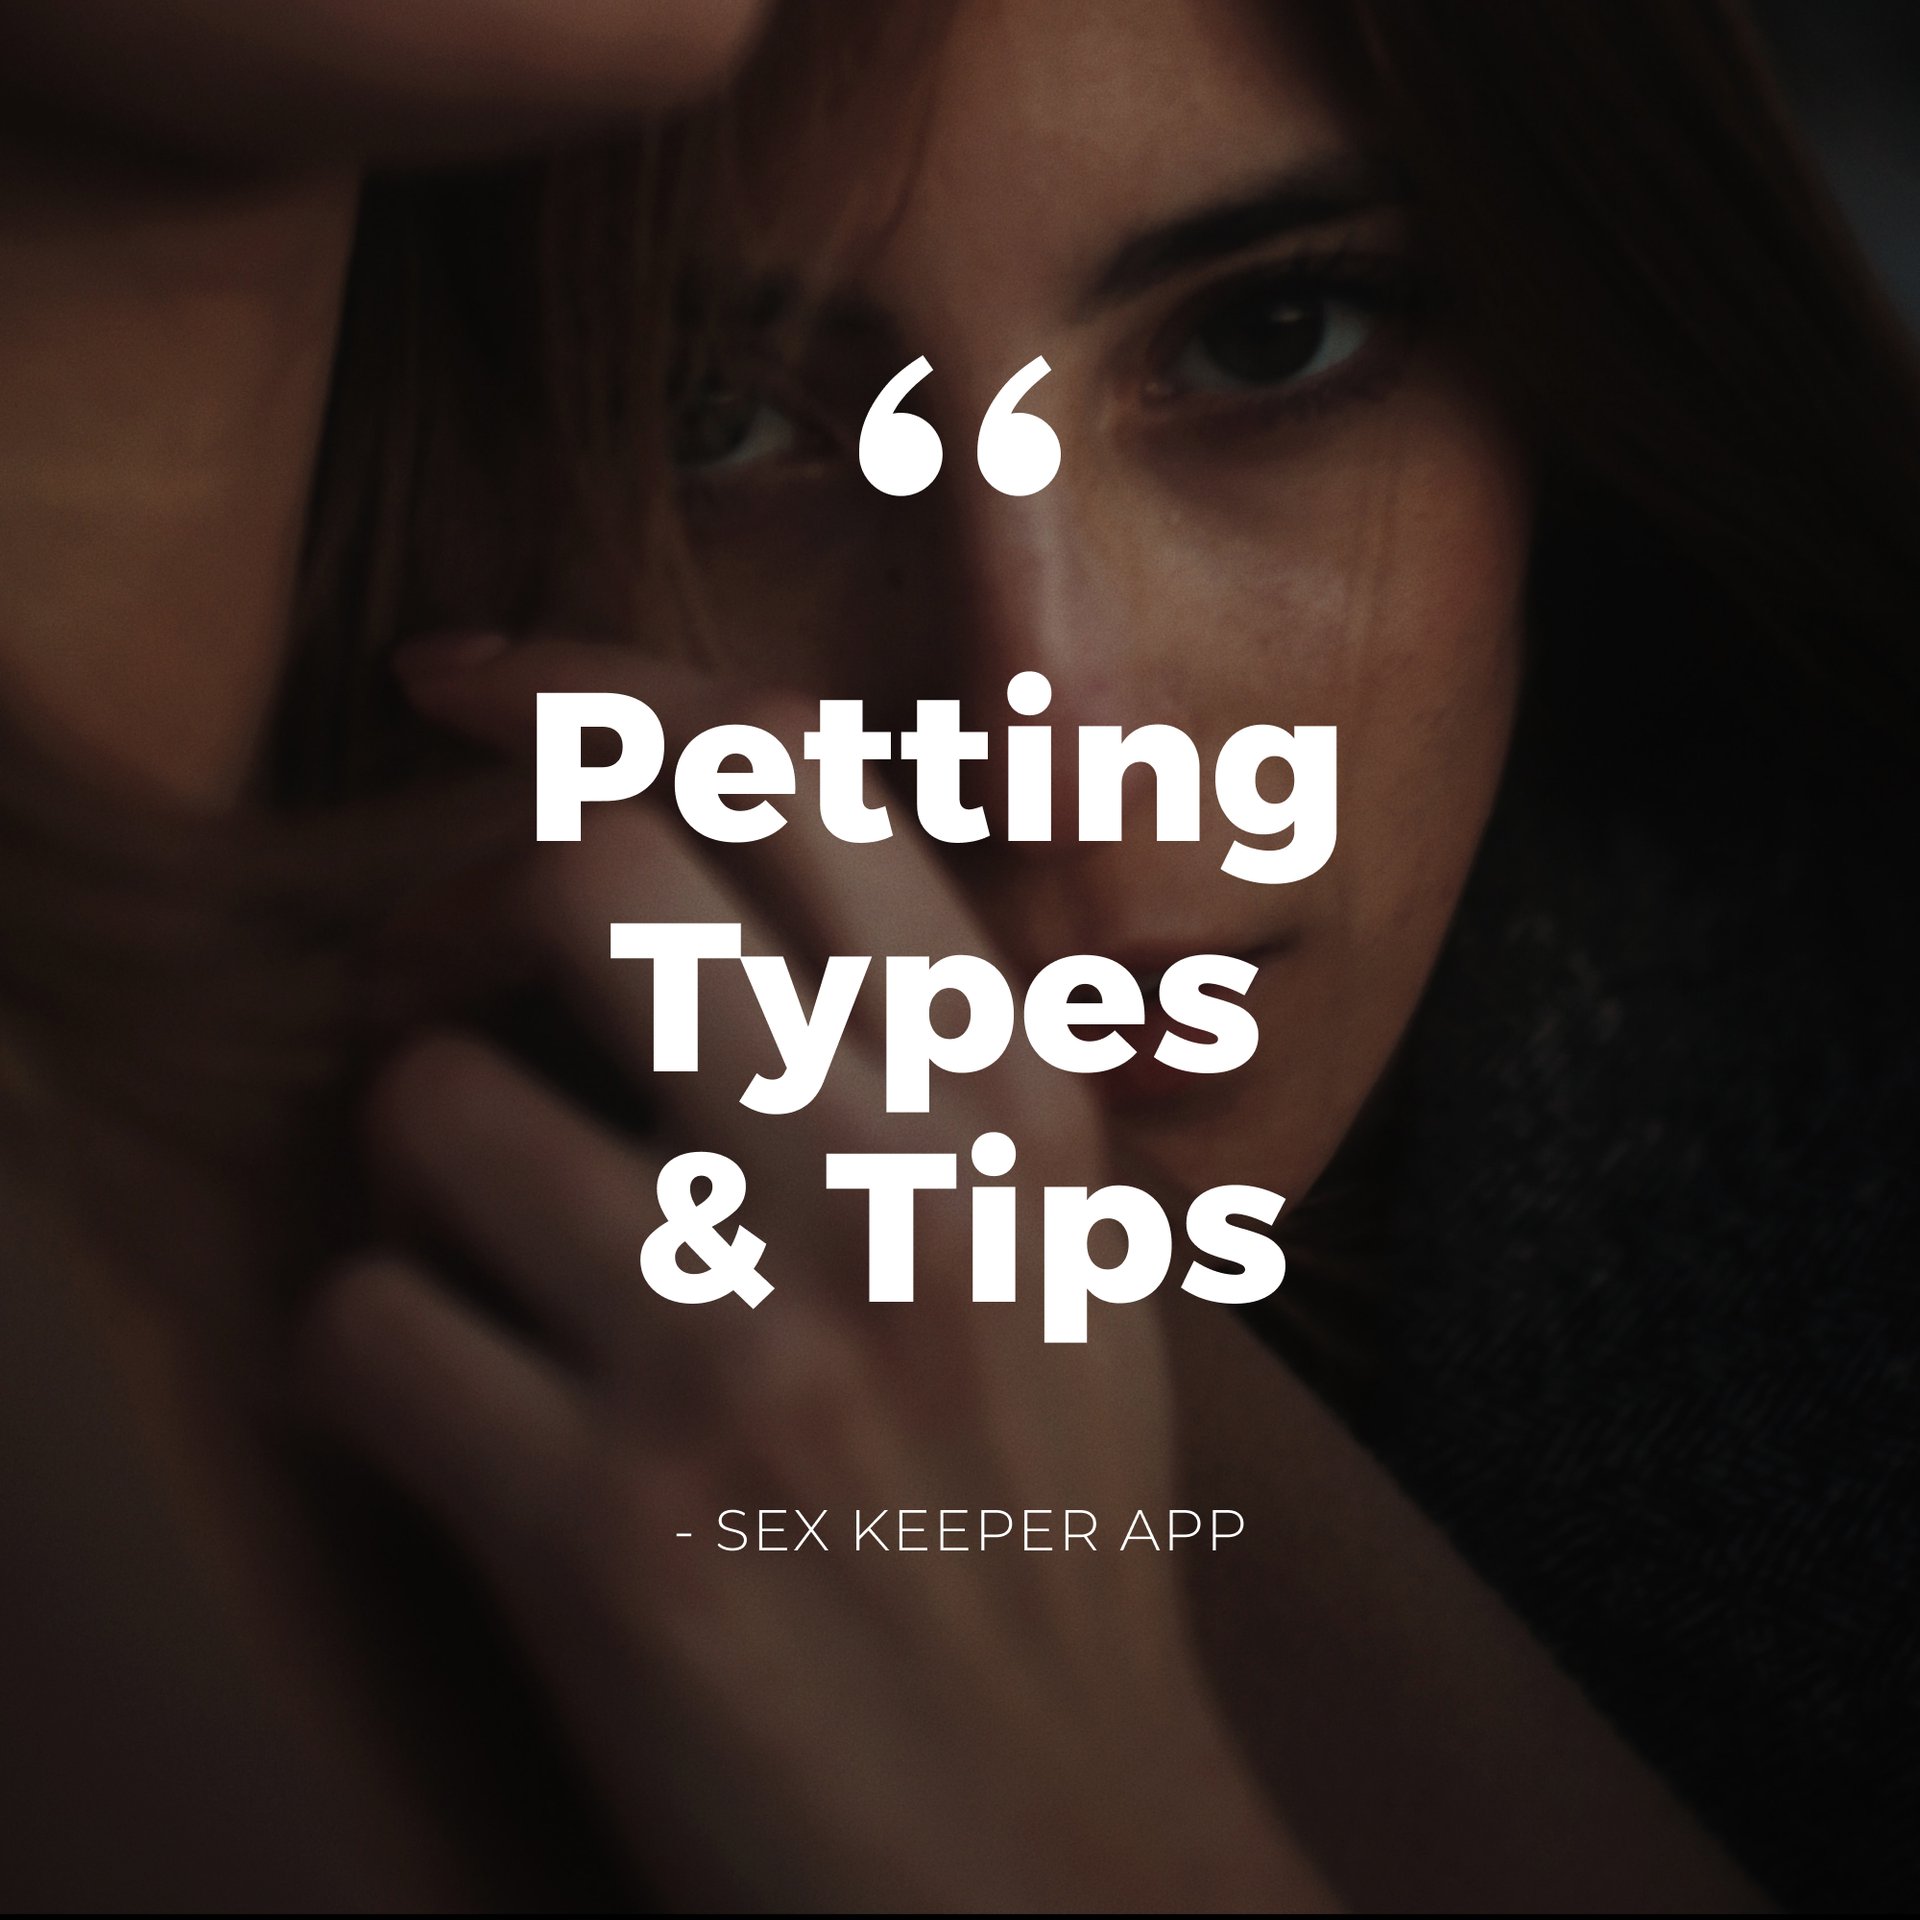 Sex Keeper App on Twitter: "Swipe left ⬅️ or read the caption below ⬇️ Light petting is mostly focused on the upper-body erogenous zones stimulation. These days petting is referred to